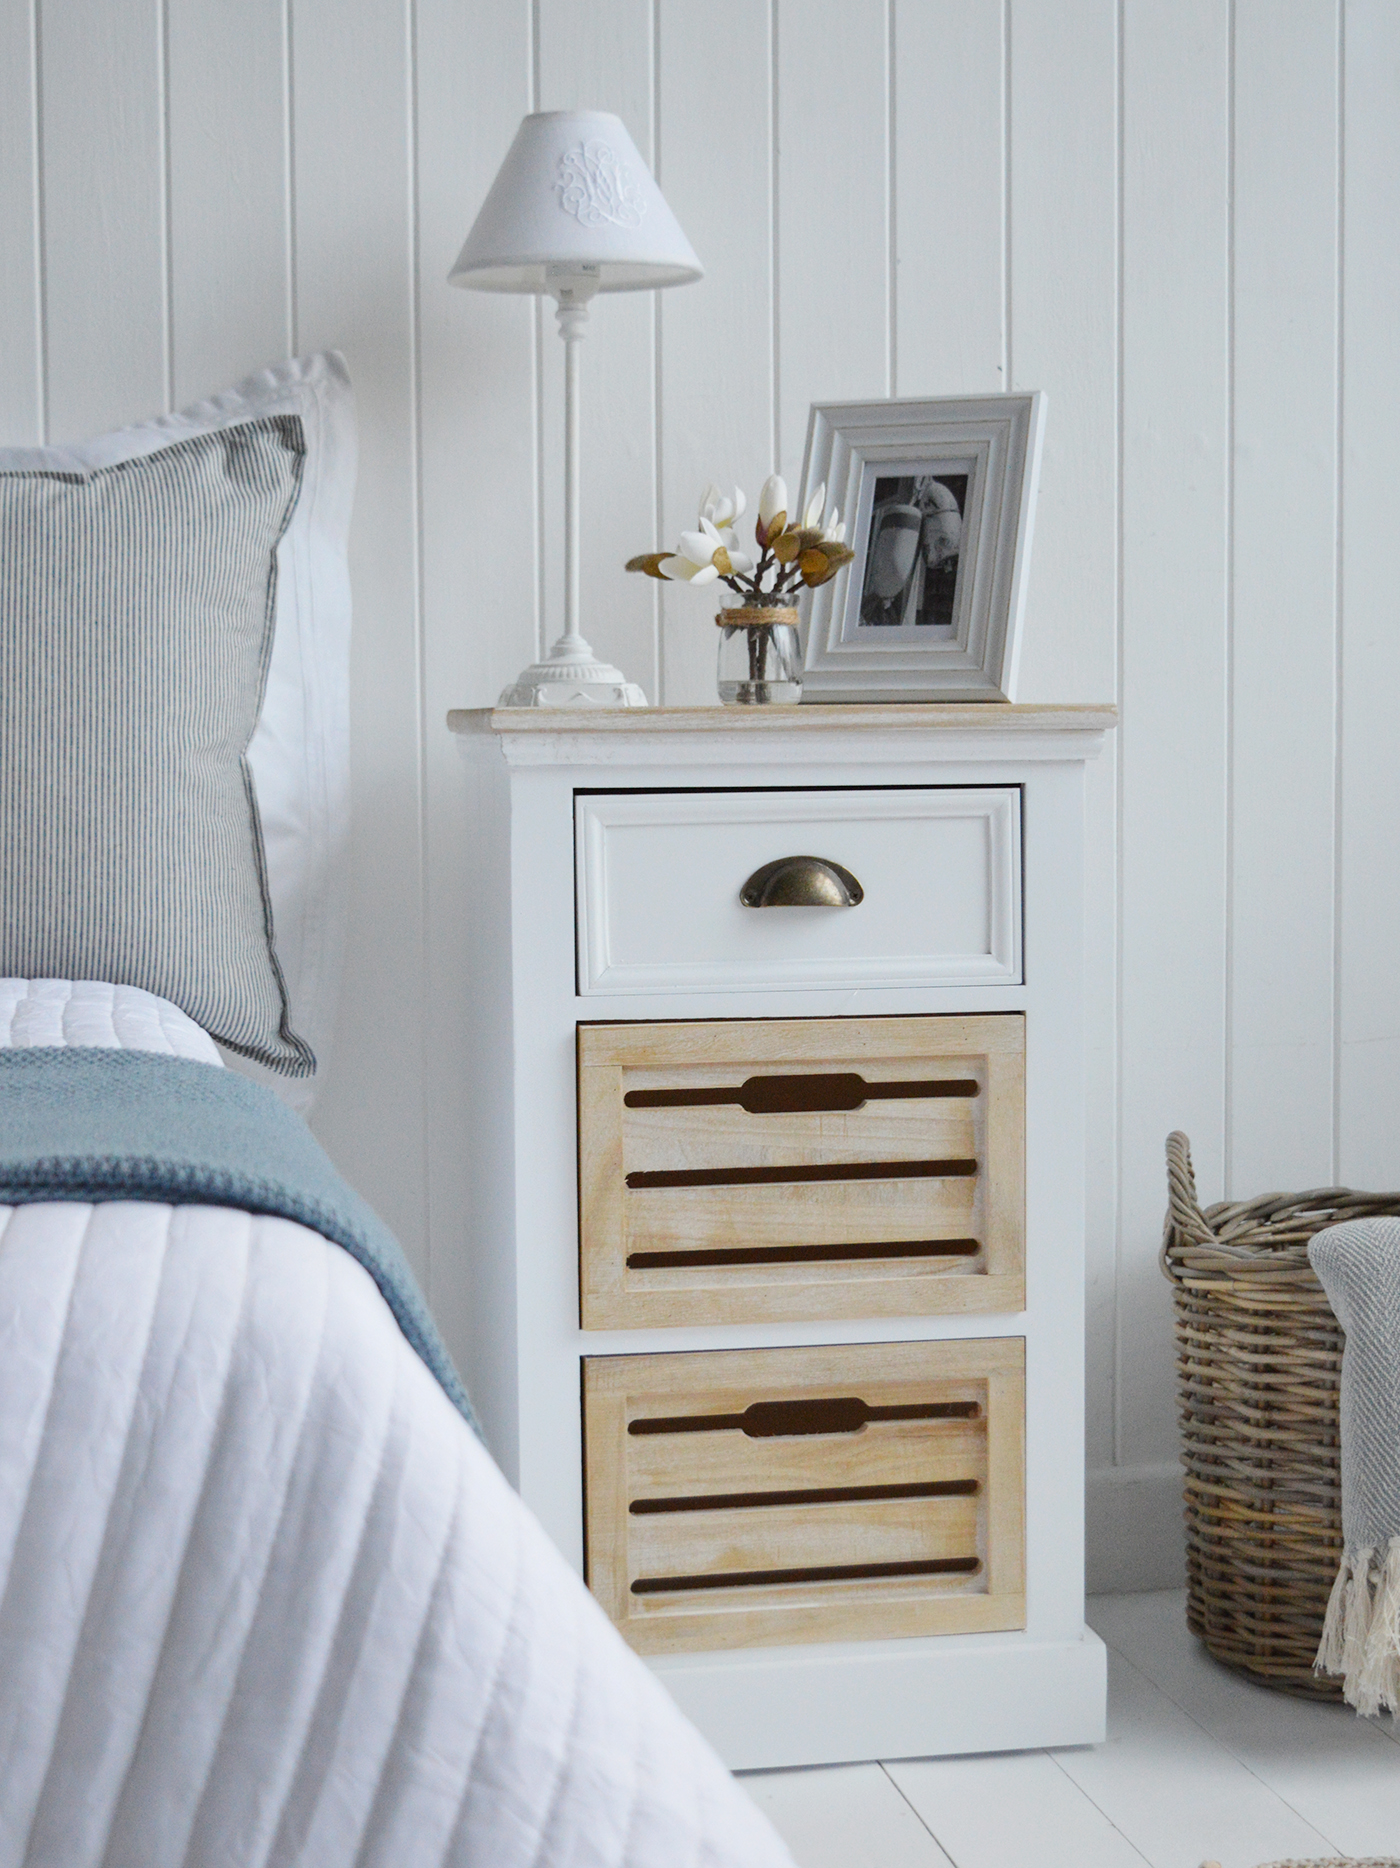 A coastal styled bedside cabinet in white and driftwood for a coastally inspired bedroom